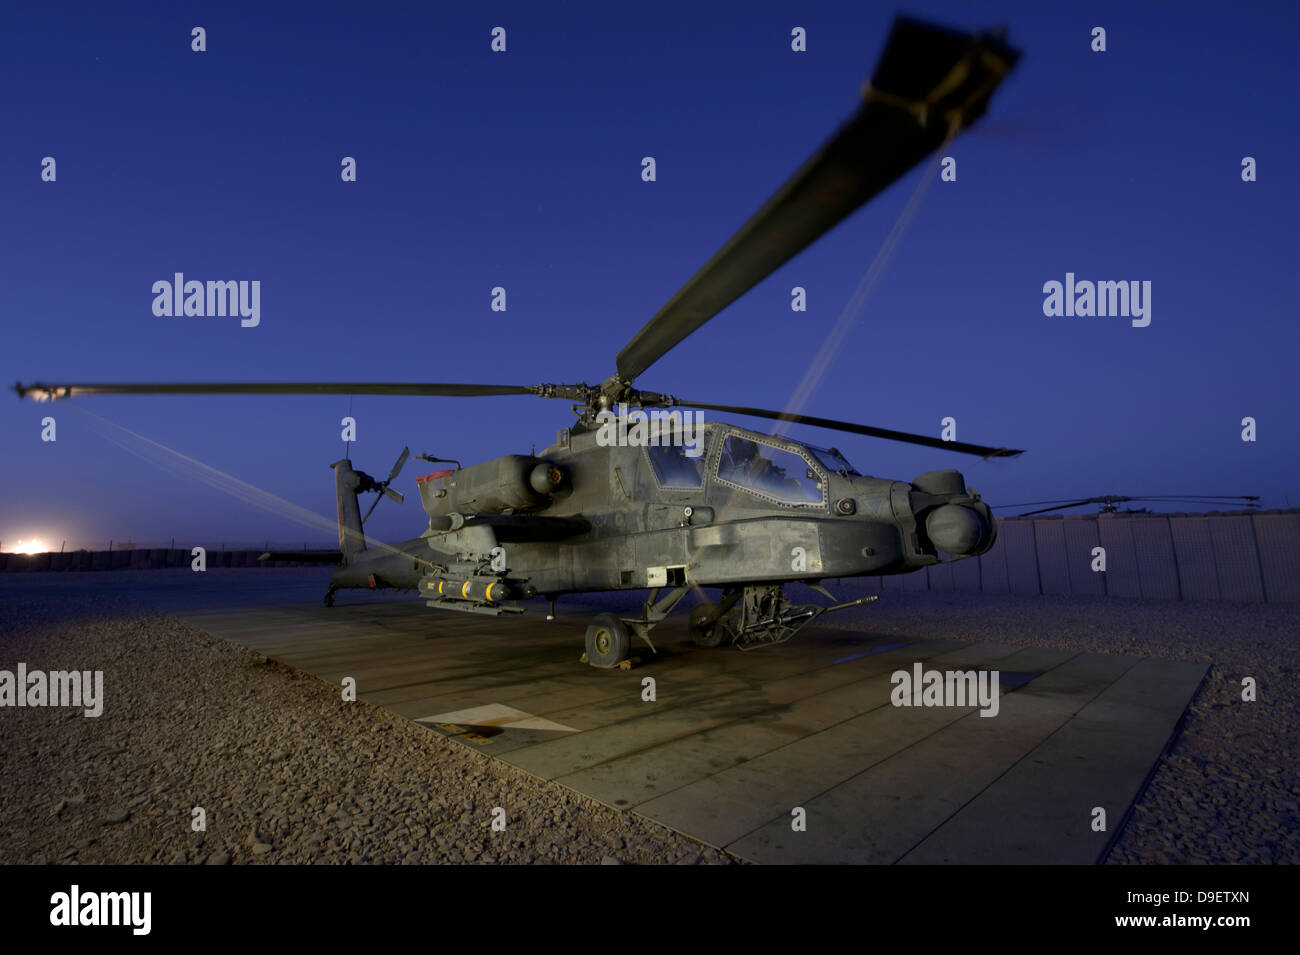 A U.S. Army AH-64D Apache helicopter at Shindand Air Base, Afghanistan. Stock Photo